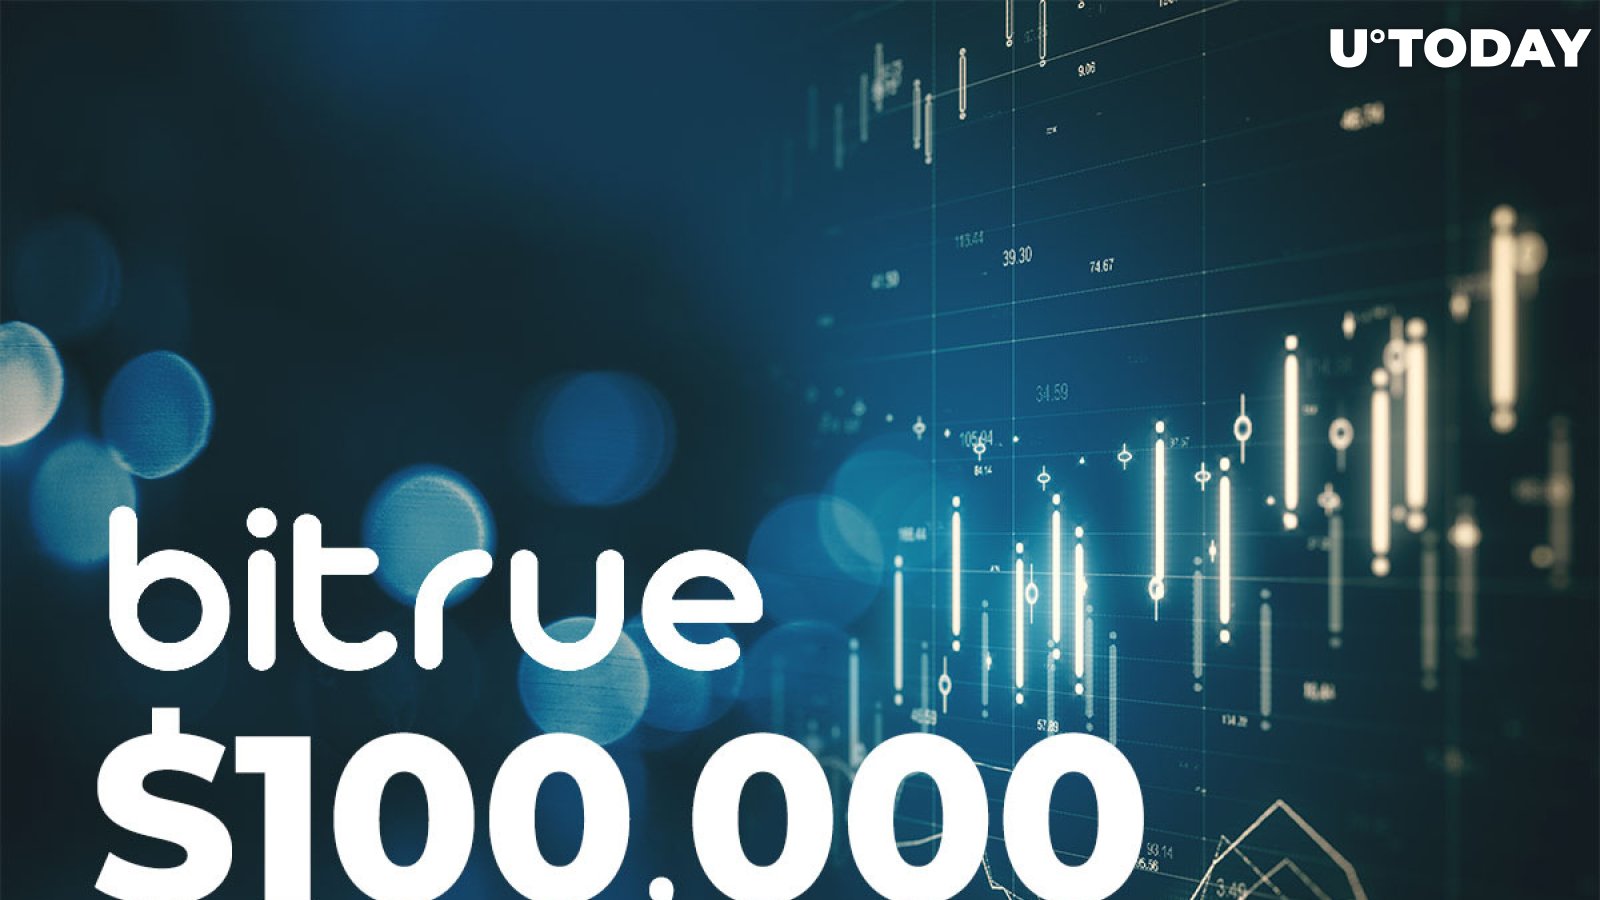 XRP-Friendly Exchange Bitrue Launches Summer Giveaway, $100,000 at Stake